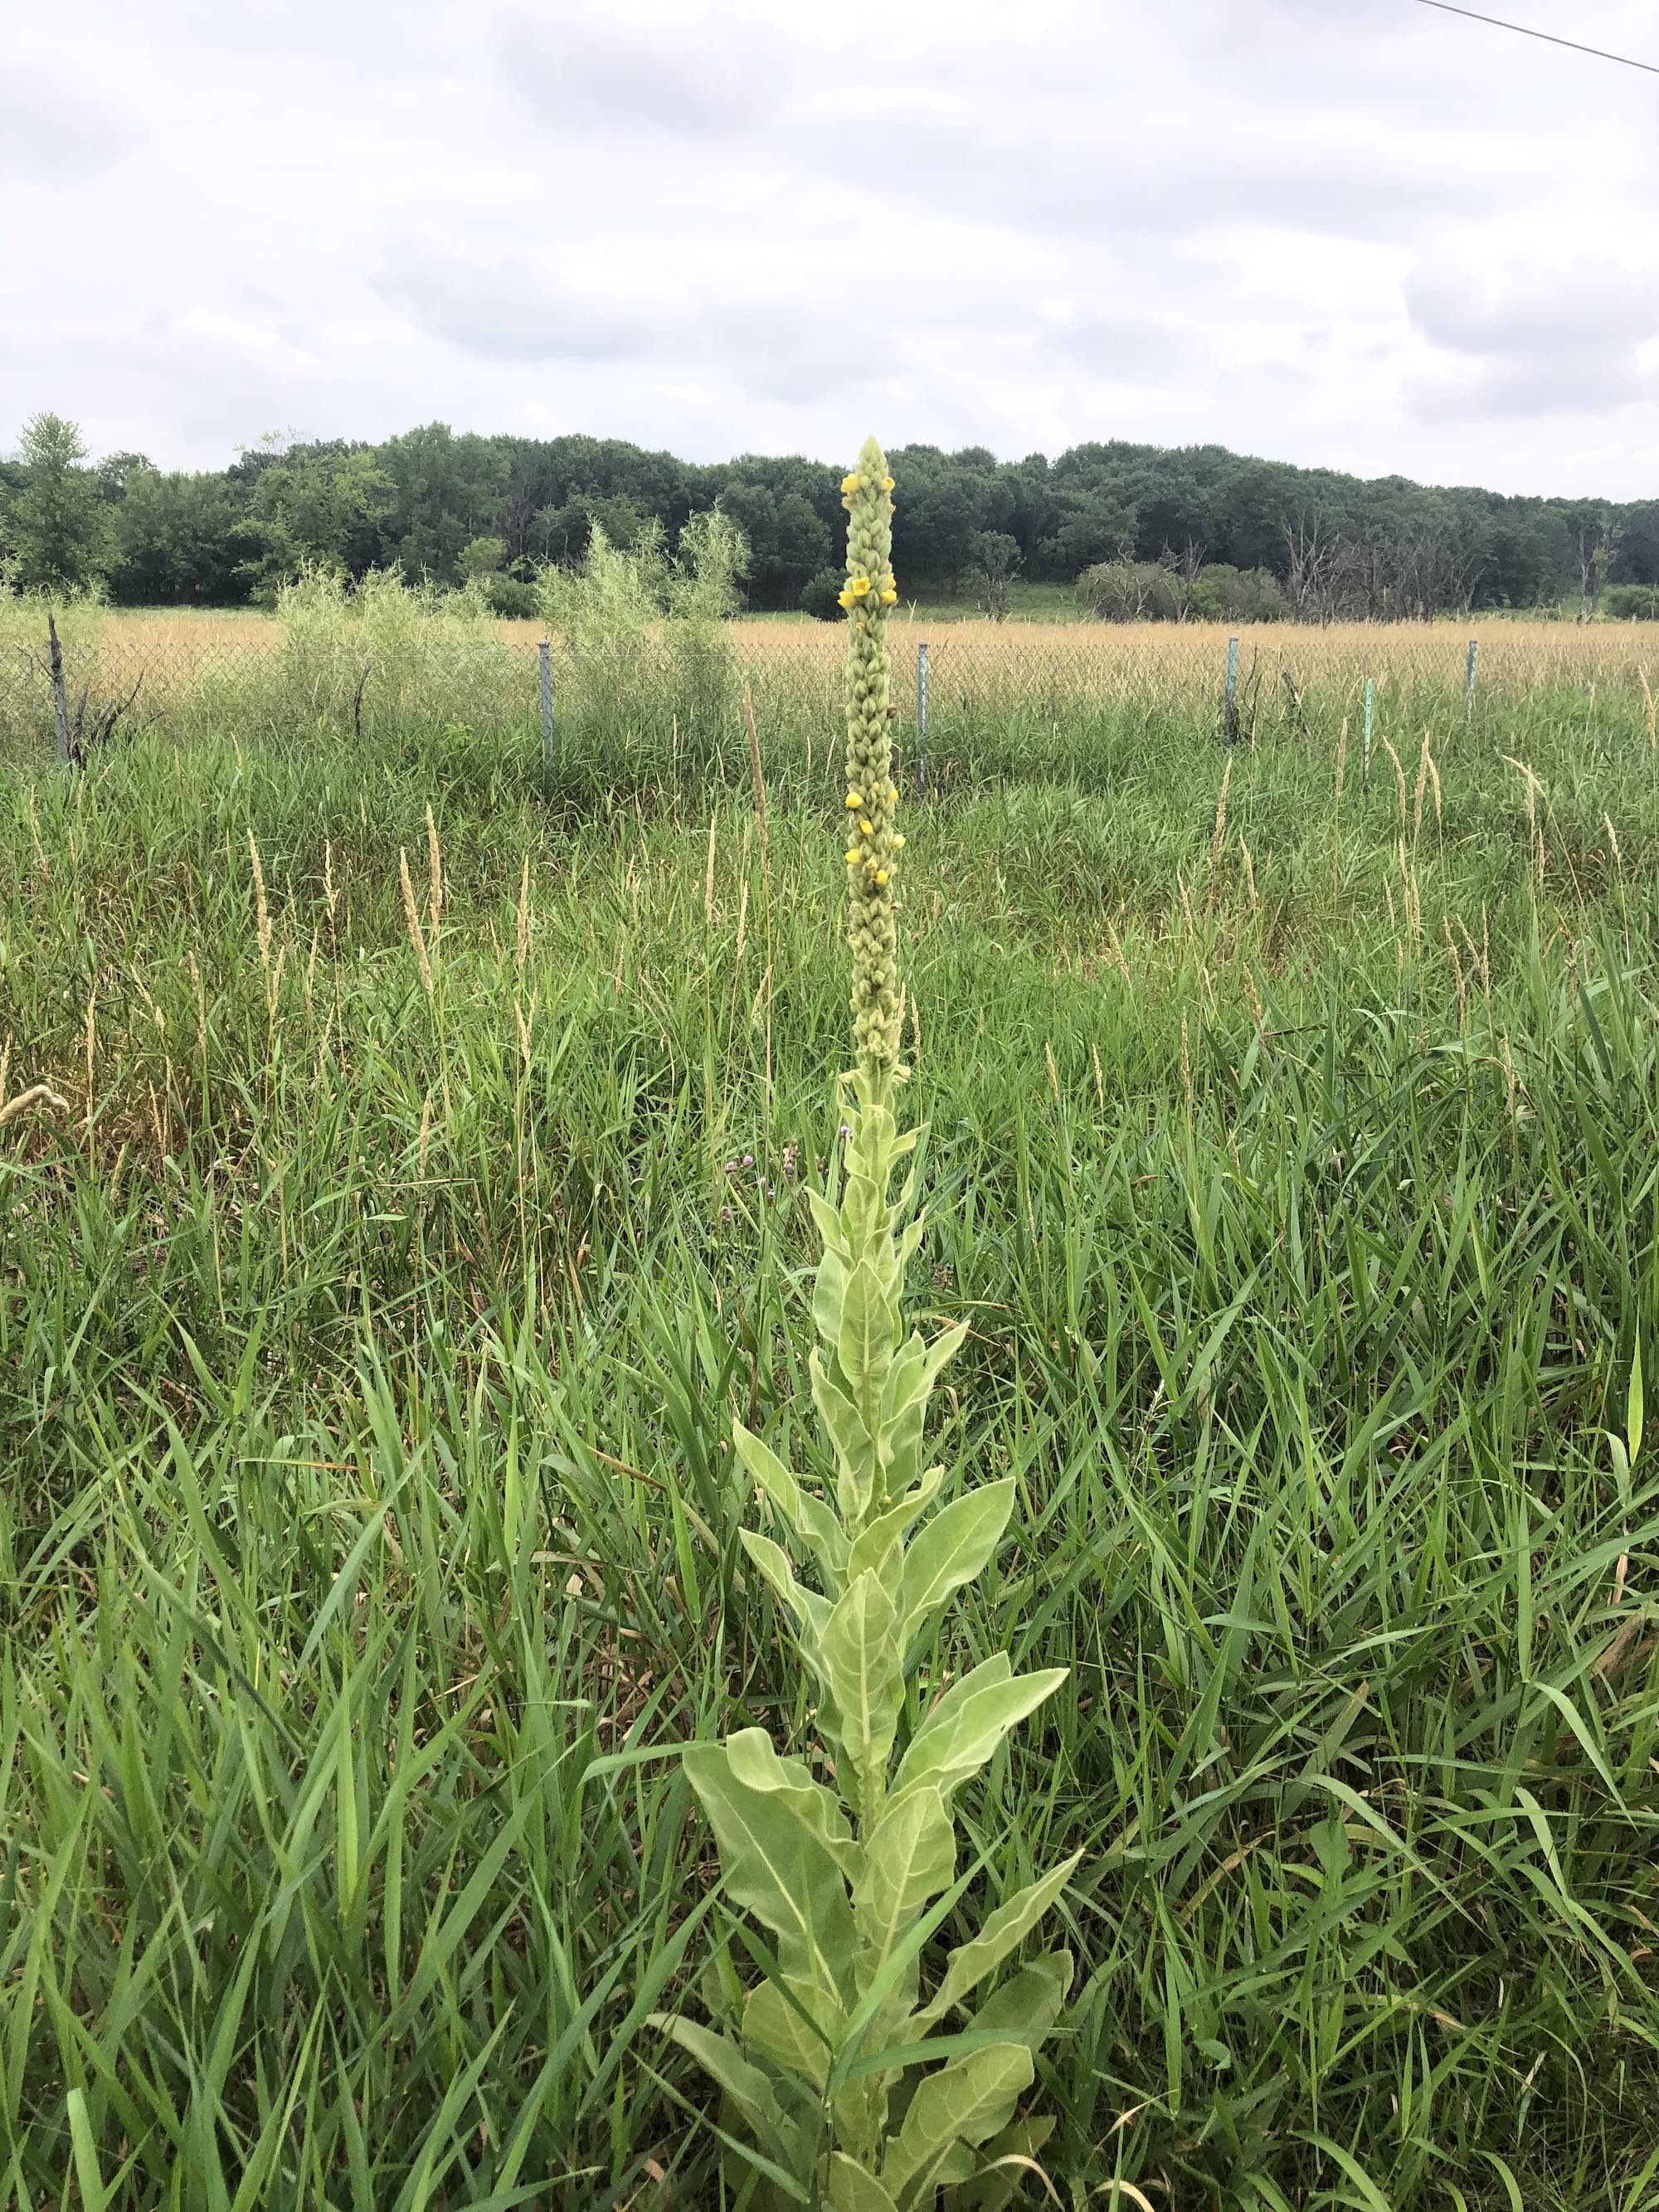 Common Mullein along Cannonball bike path on July 13, 2021.